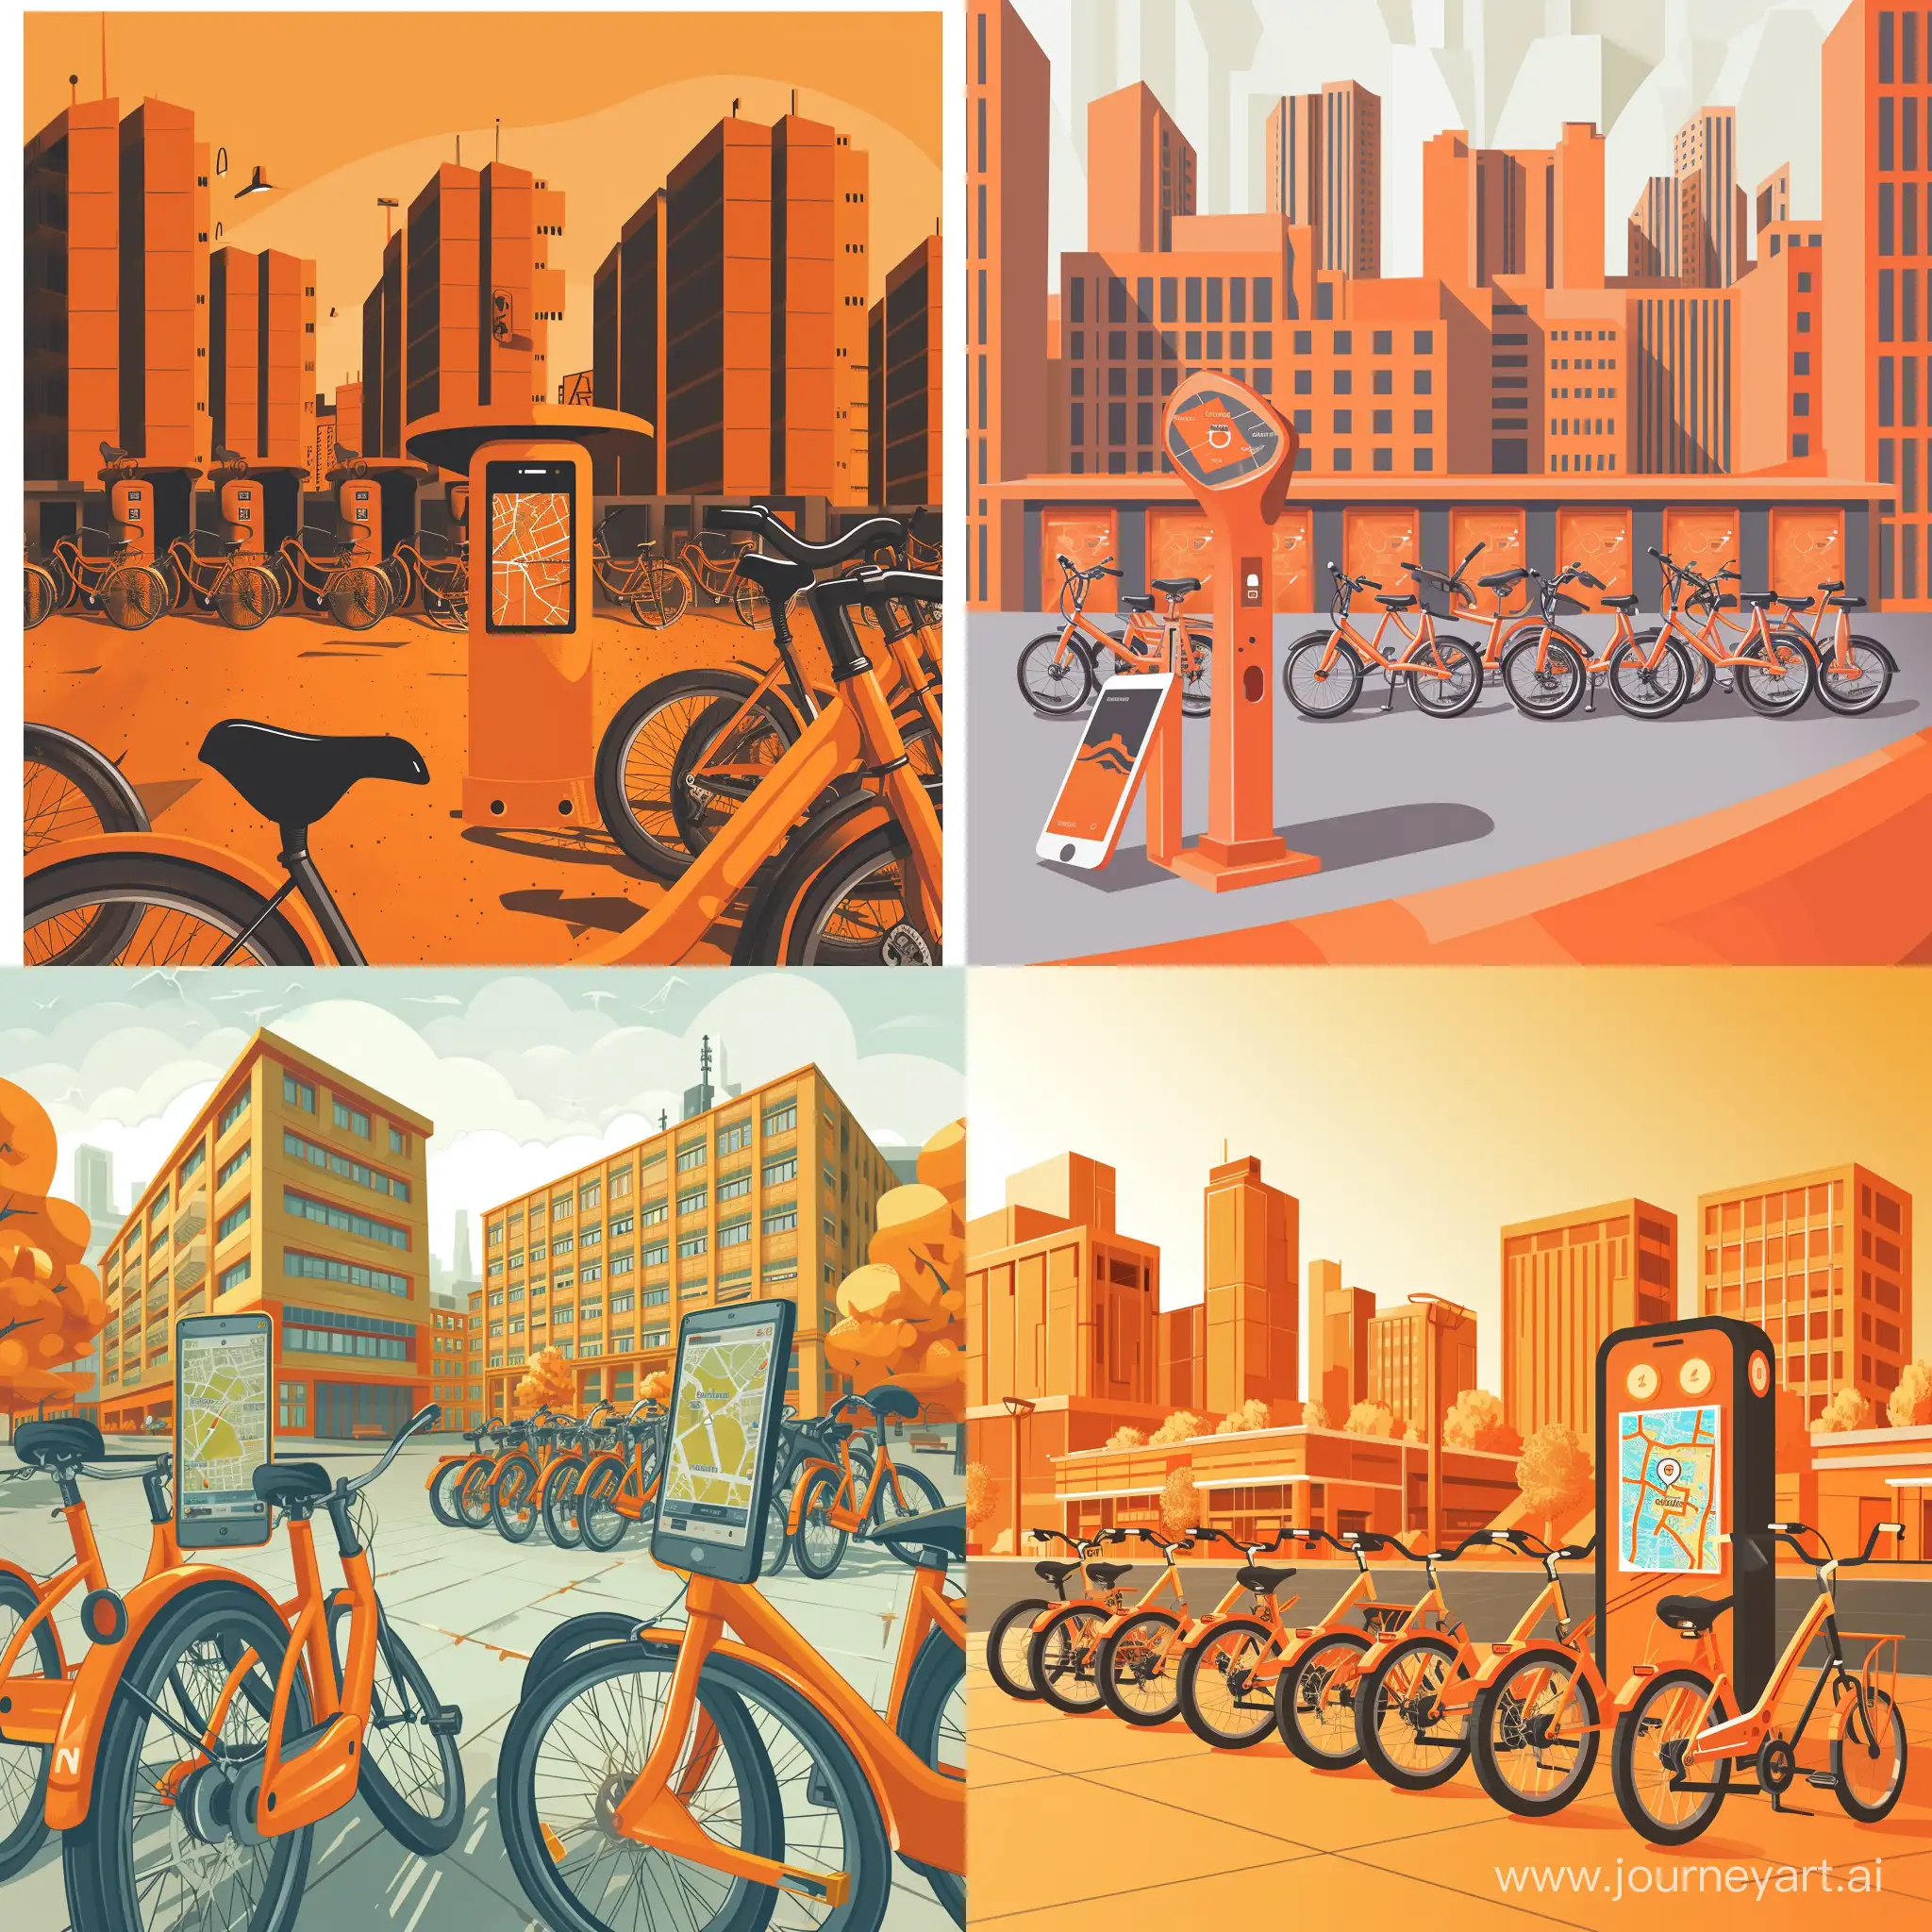 A bicycle rental station with several bicycles in park mode with orange color and a mobile phone in the image showing the map inside the mobile phone and the location icon in the university environment with orange and tall and wide buildings and the university campus. I want a very, very high quality image.